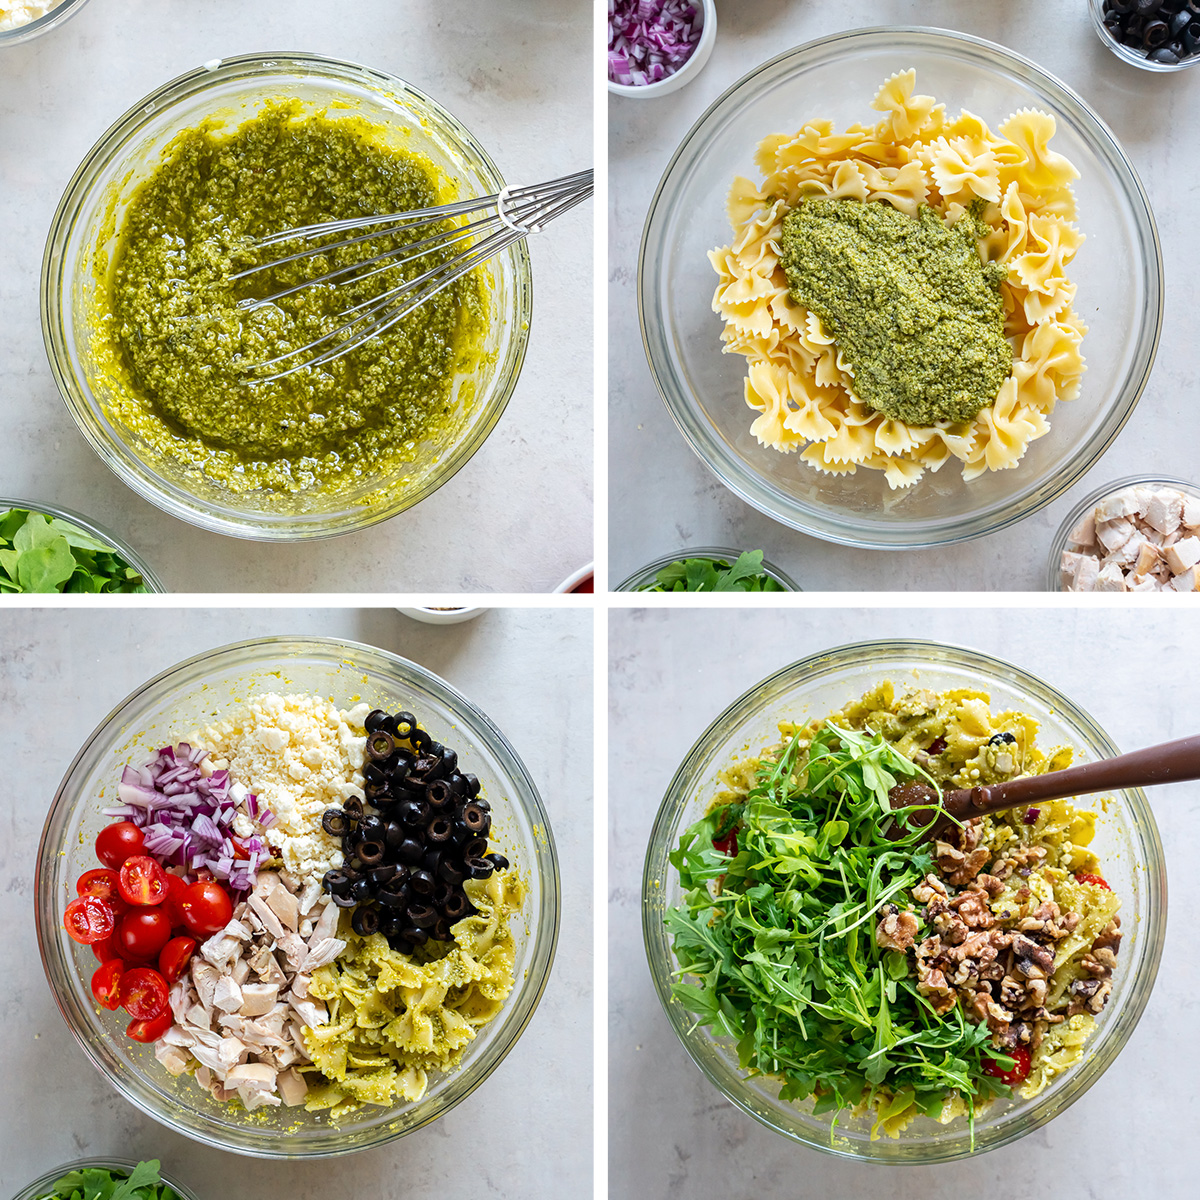 Pesto with yogurt in a bowl with a whisk, on top of cooked pasta in a bowl, and other ingredients added to the chicken pesto pasta salad.